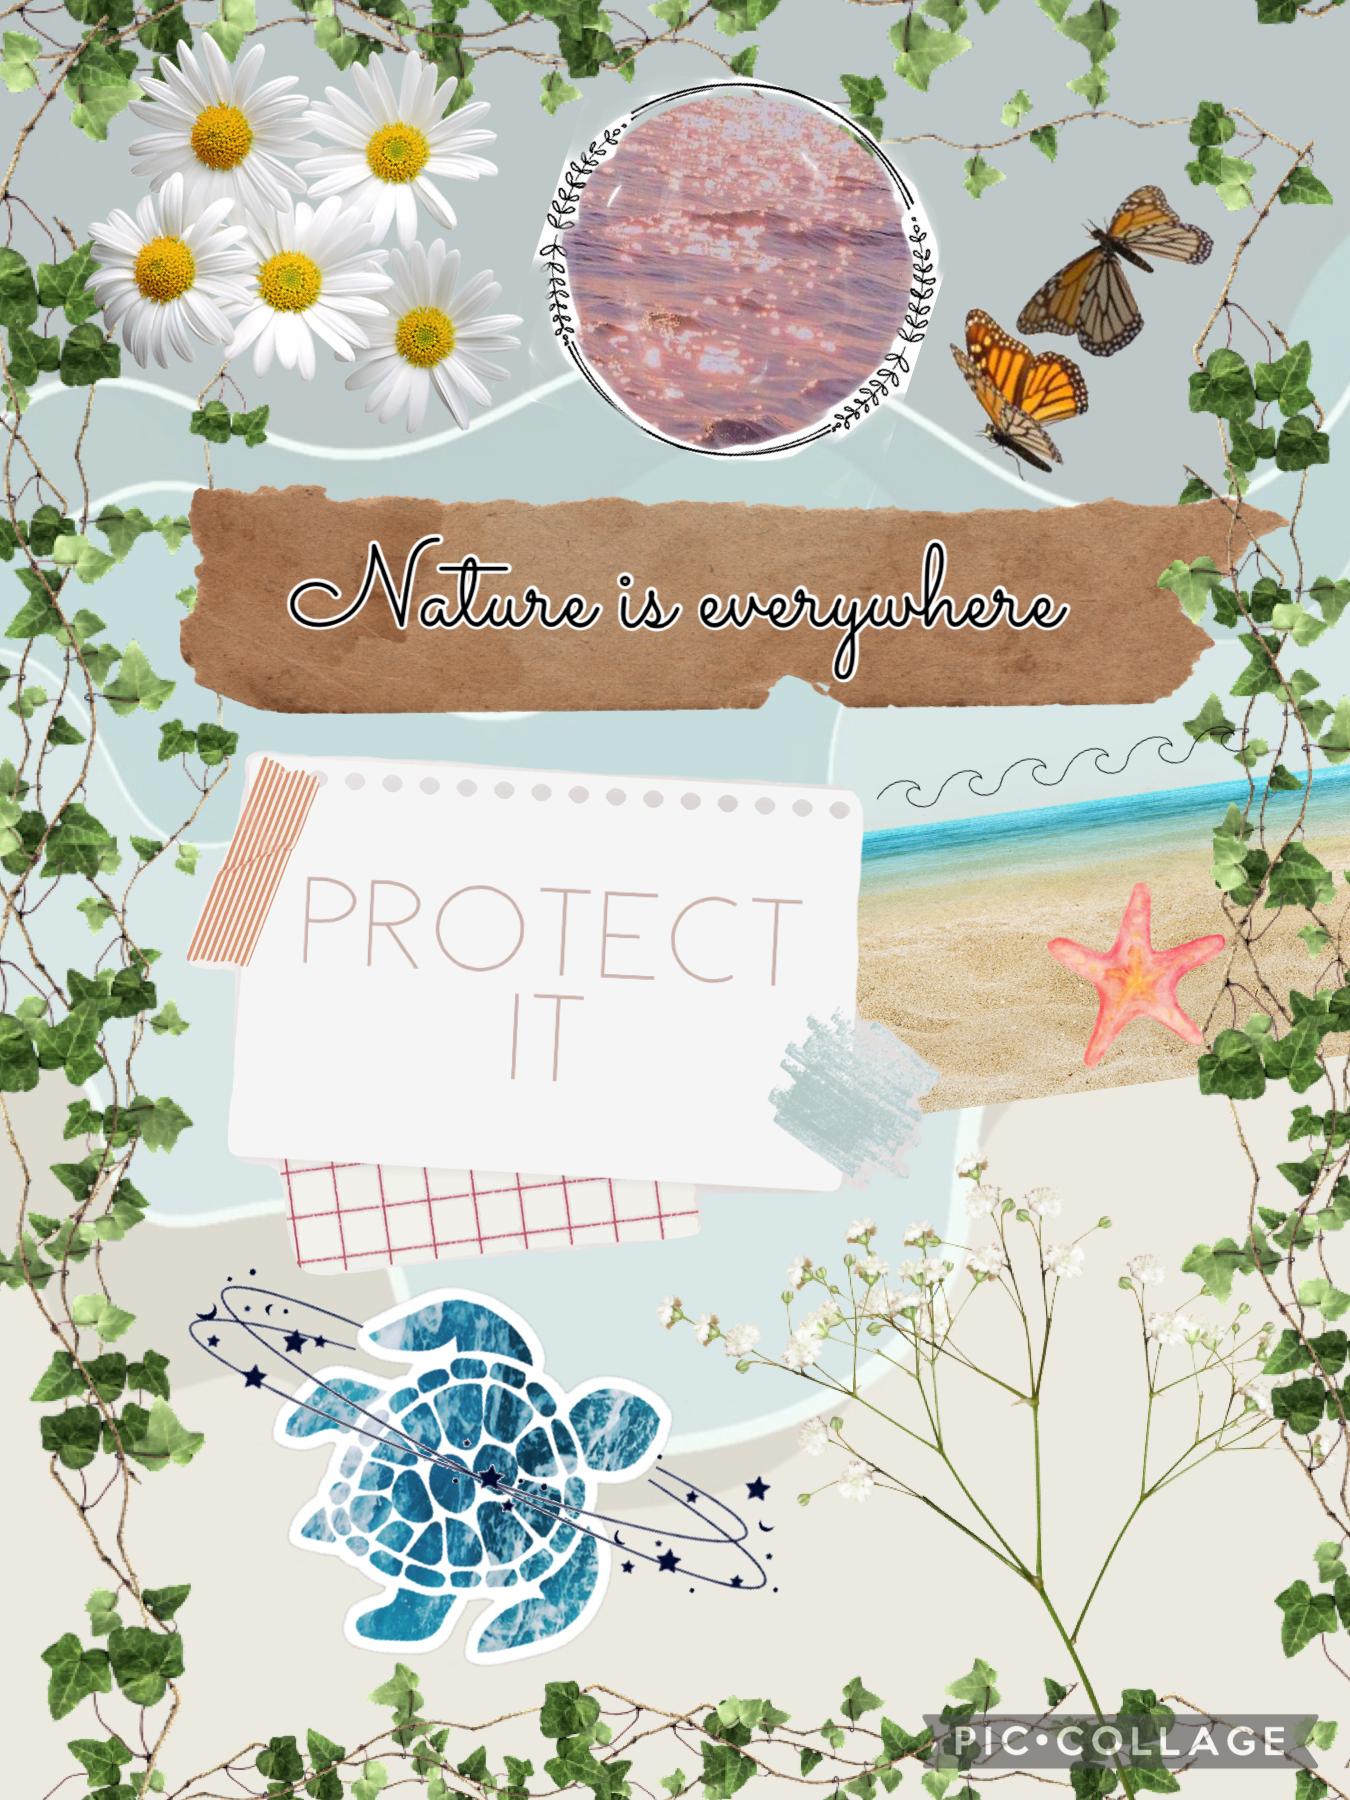 Tap Me!
This collage is about how nature is everywhere and that we need to protect our earth. Hope you like it!